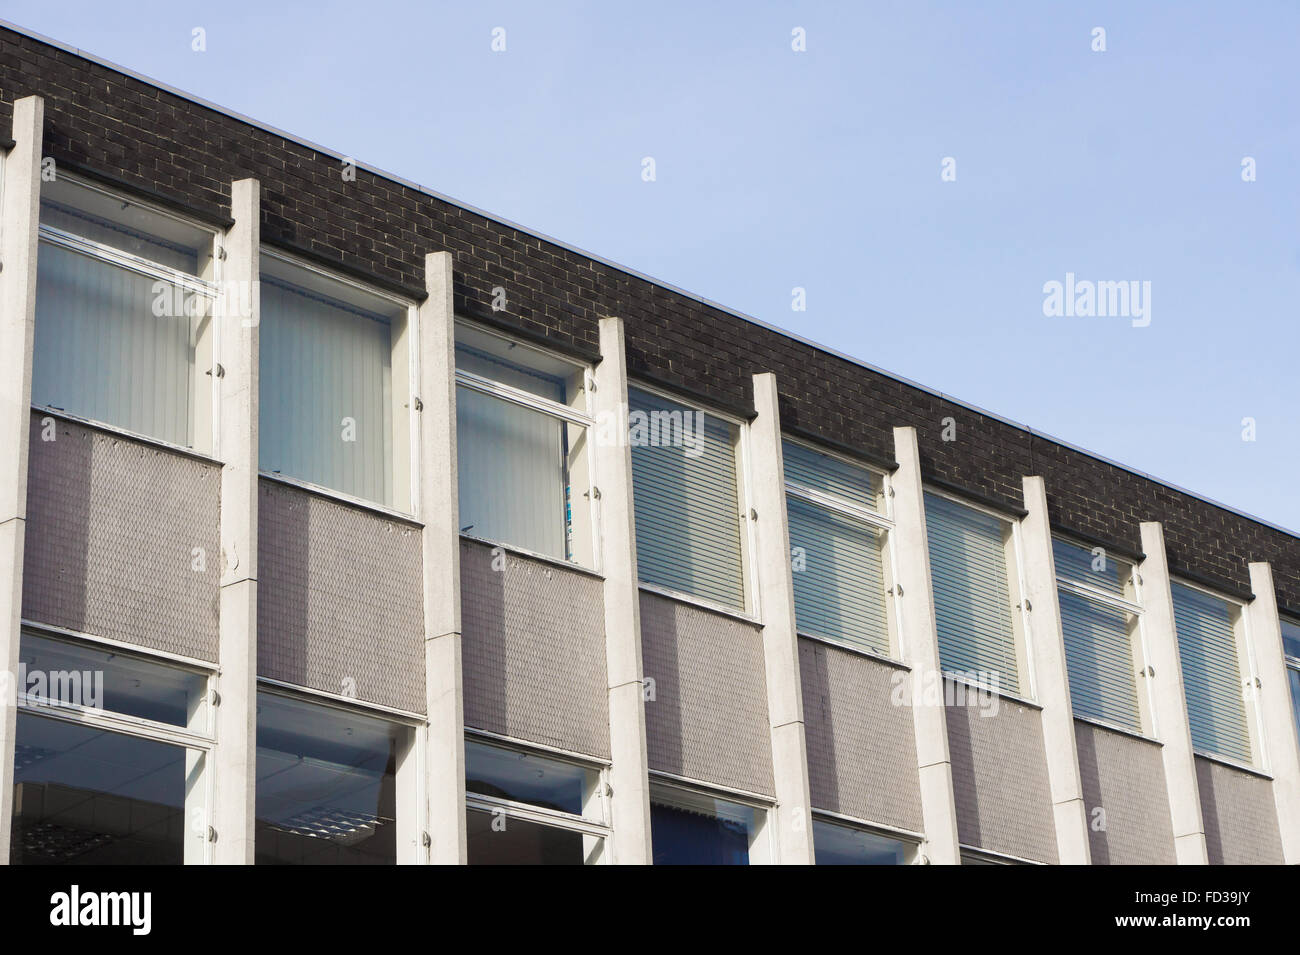 The top of an office building from the 1960s or 1970s in Ipswich, UK Stock Photo